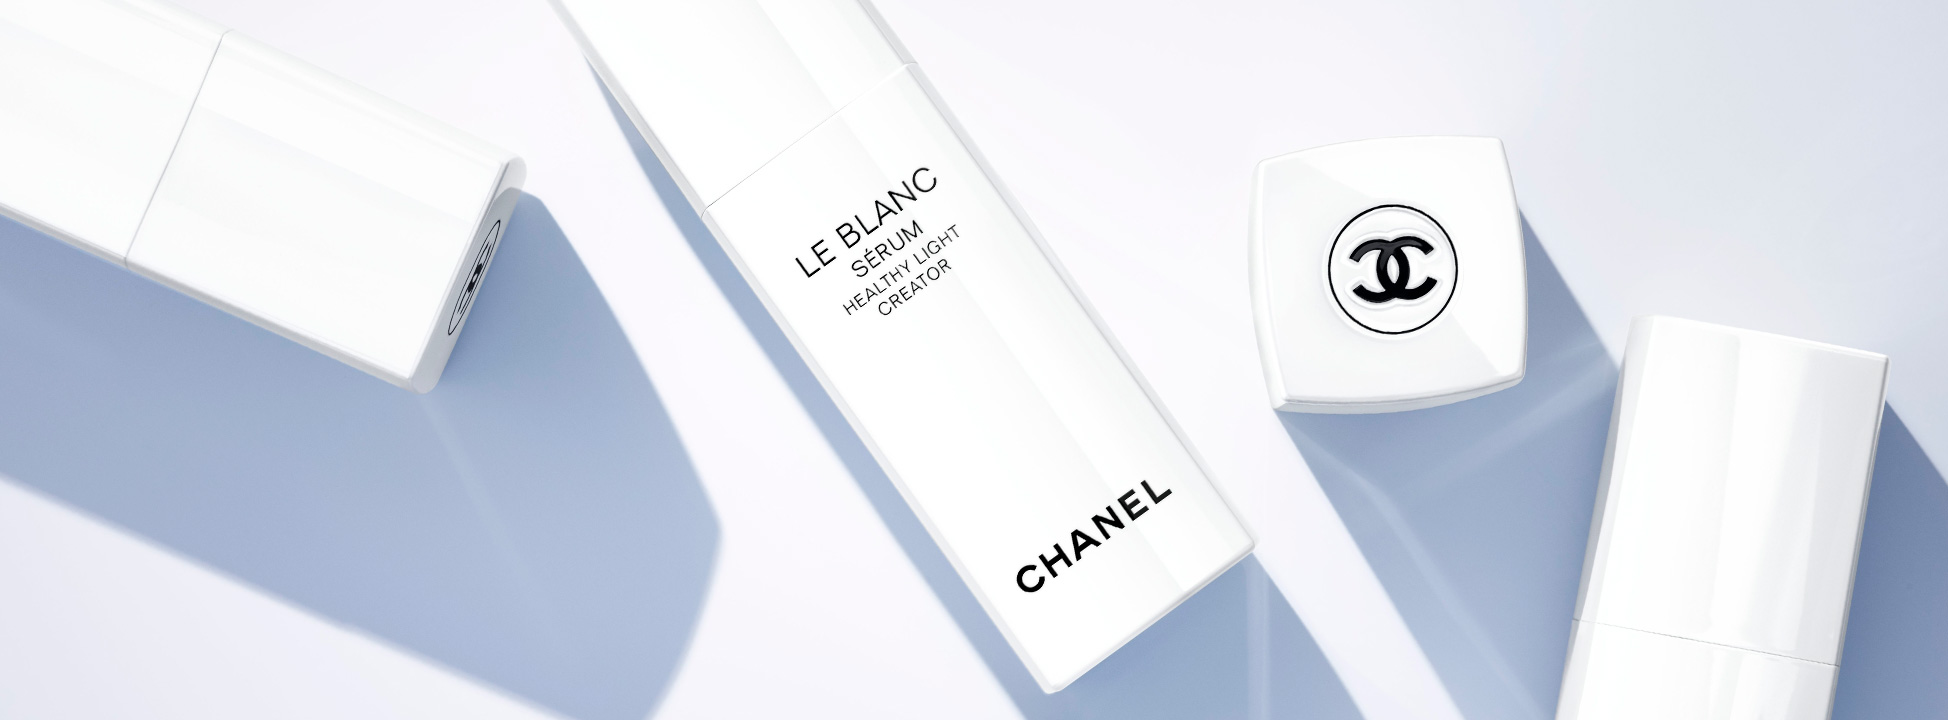 6 new whitening products for your fairest and brightest skin yet